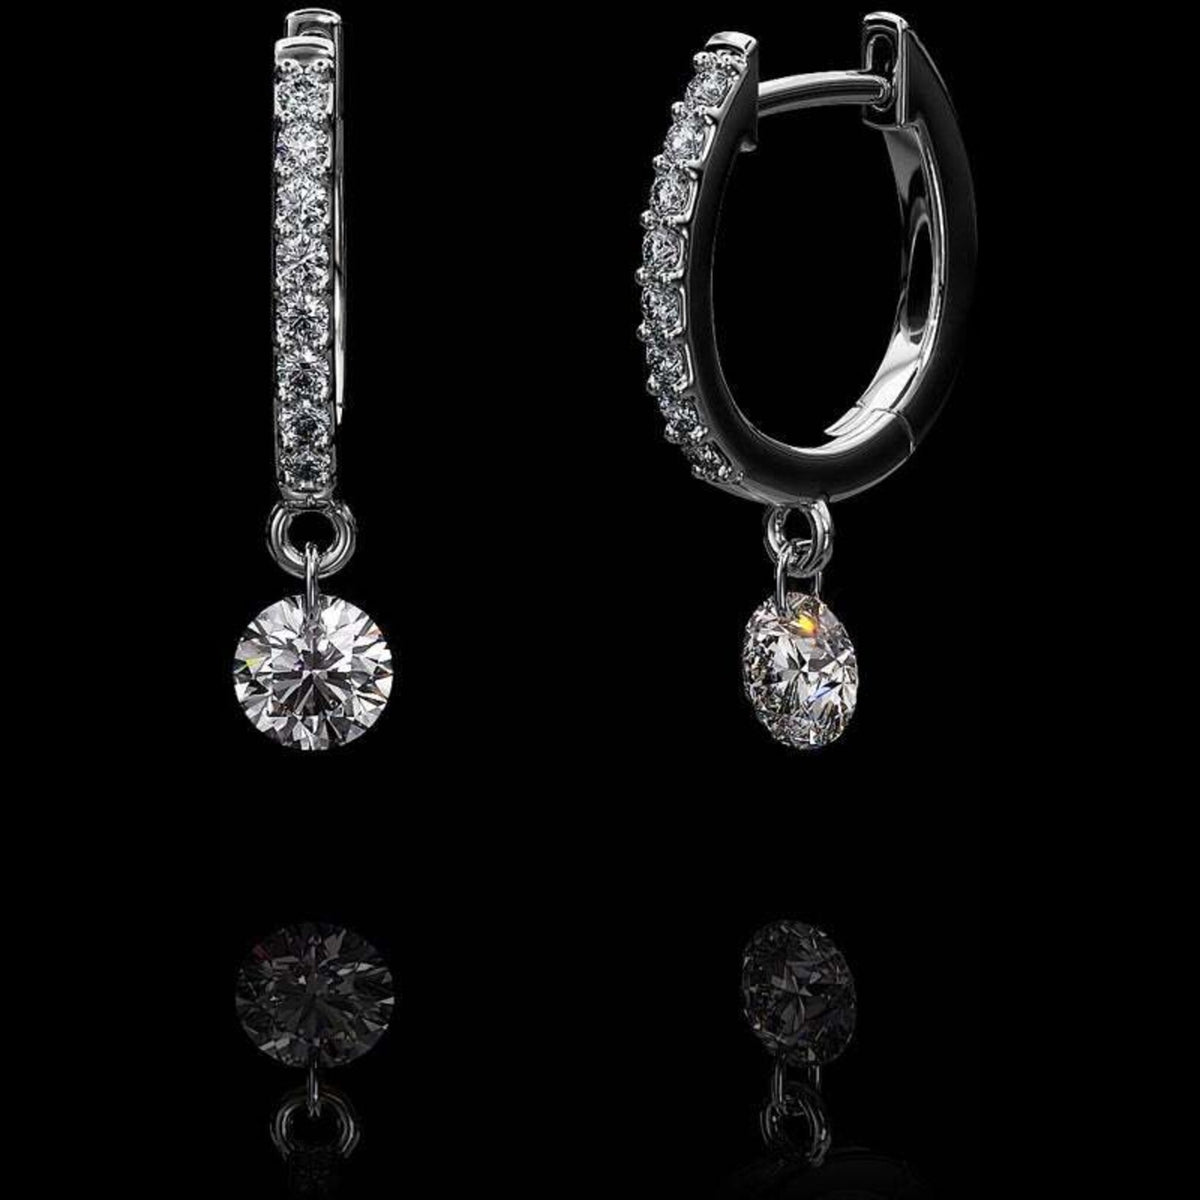 Aresa New York - Beauvoir No. 1 Earrings - 18K White Gold with 0.70 cts. of Diamonds